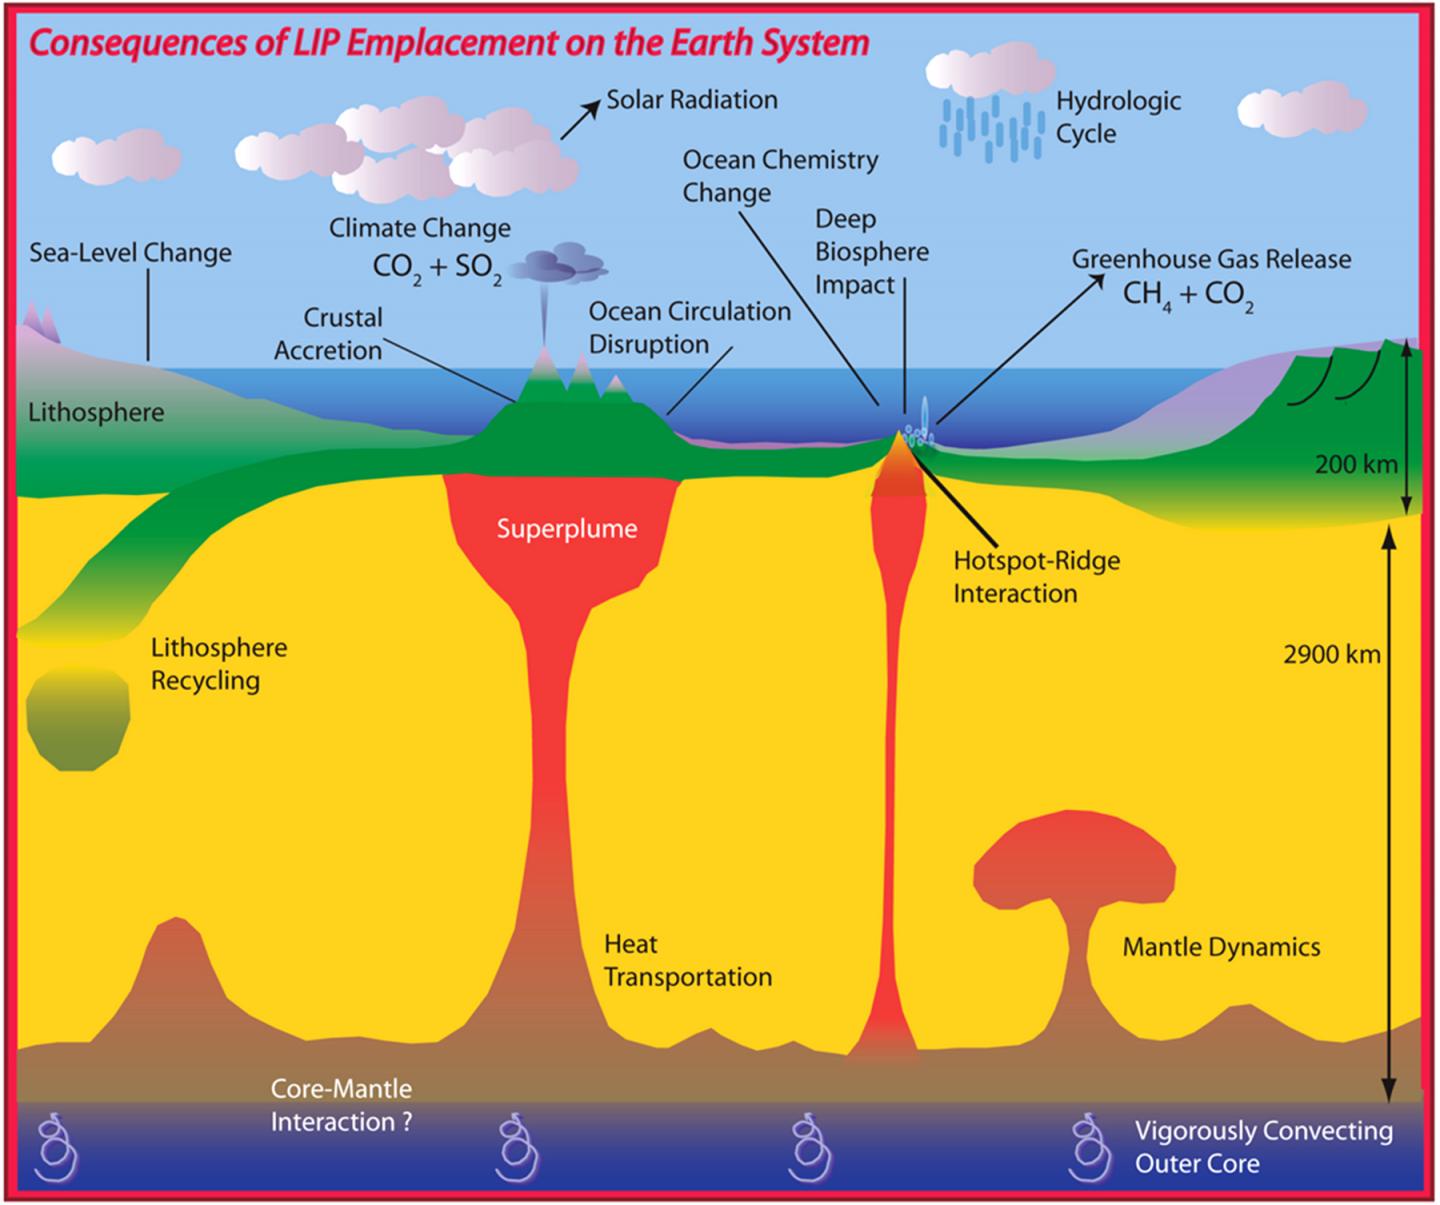 Consequences of LIP Emplacement on the Earth System